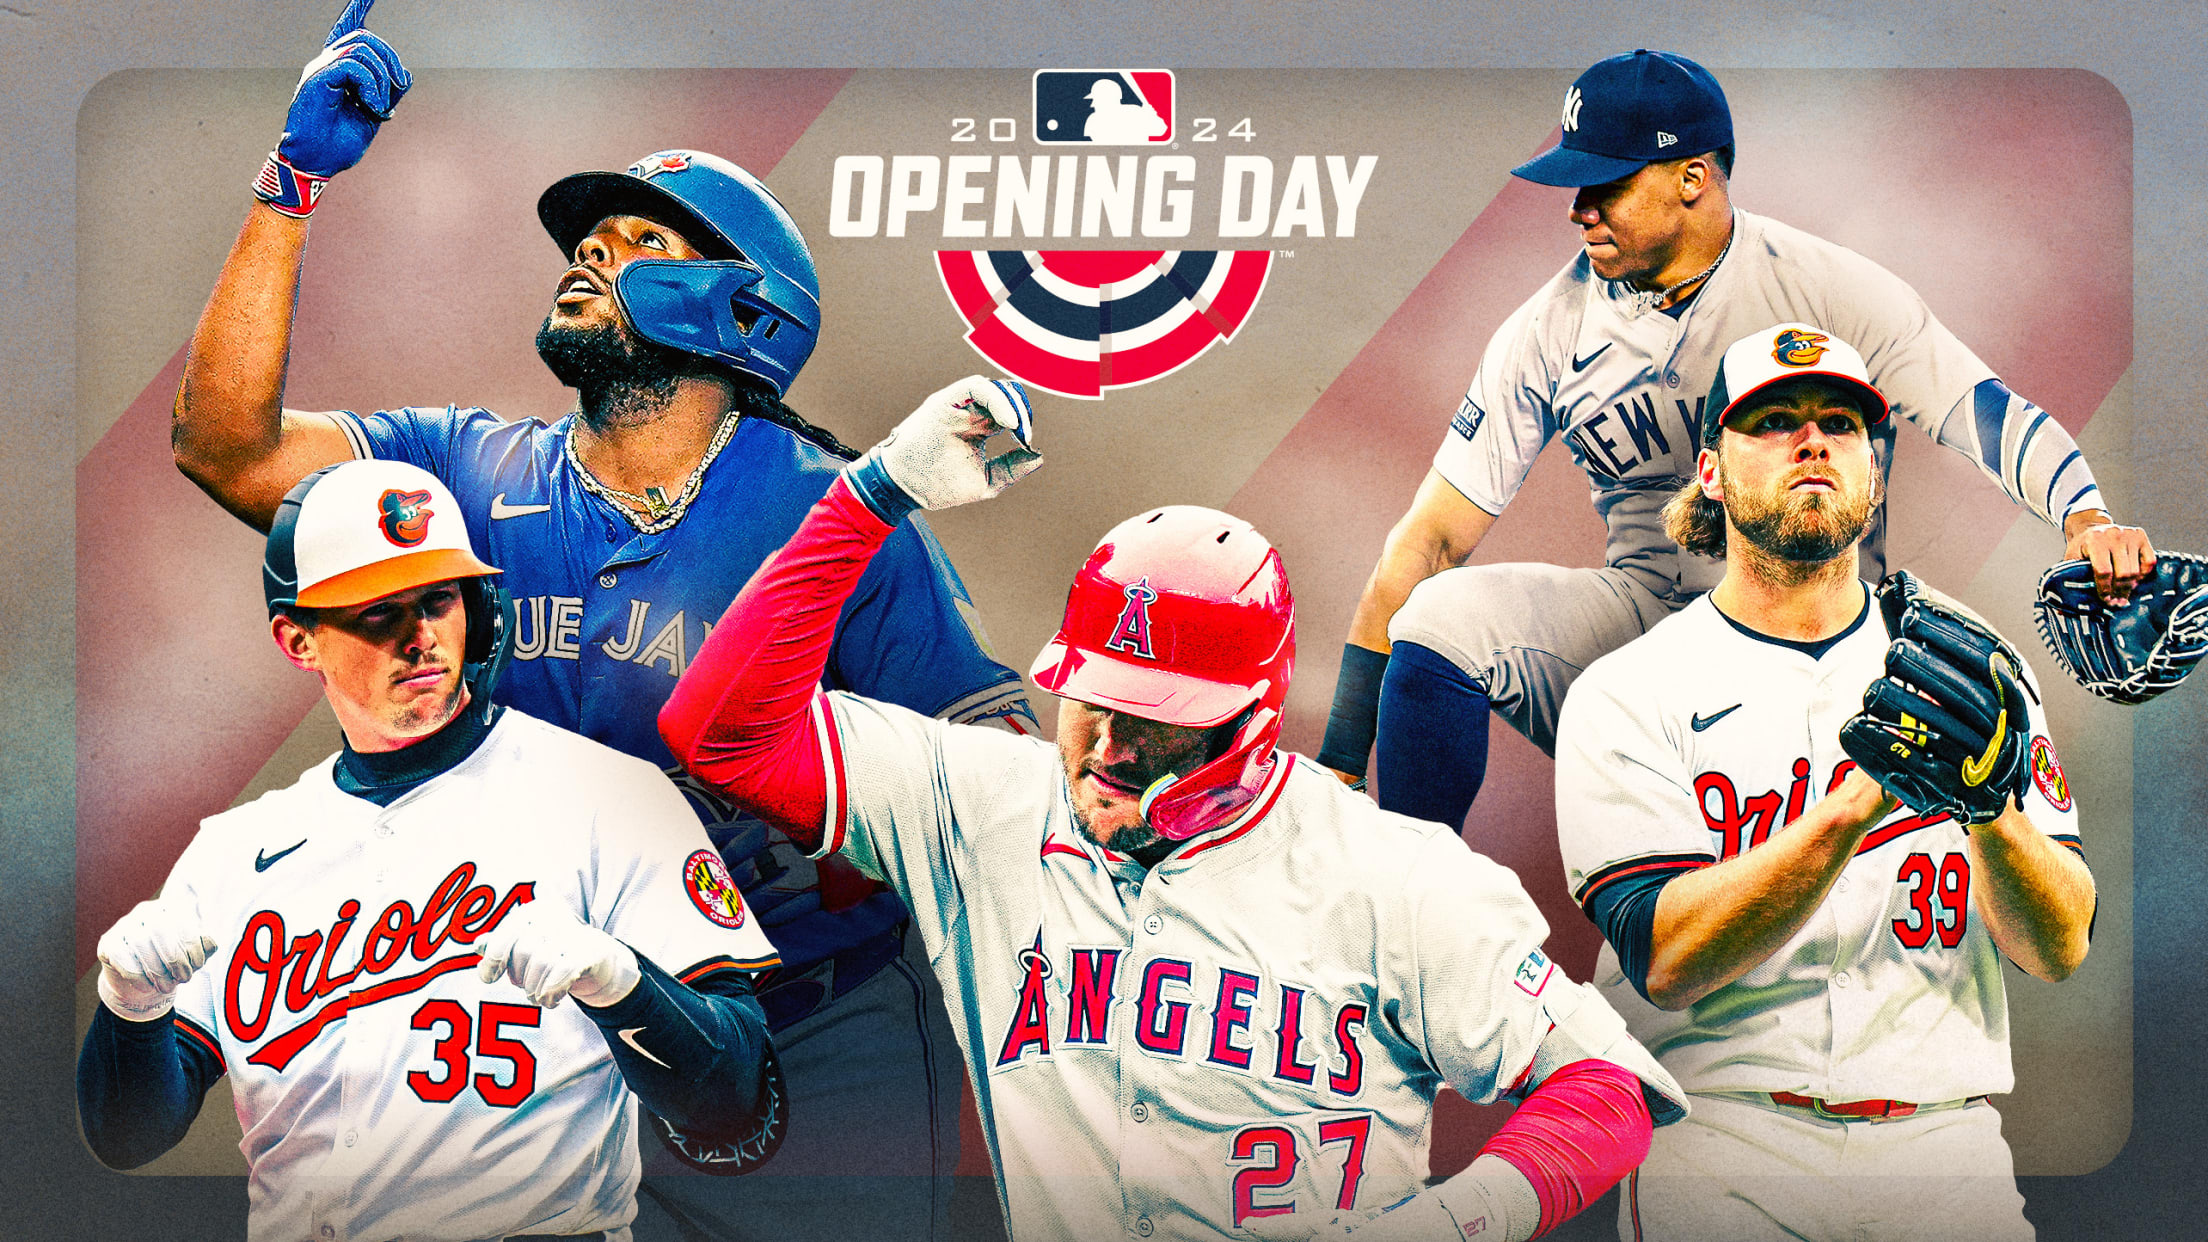 Adley Rutschman, Vladimir Guerrero Jr., Mike Trout, Juan Soto and Corbin Burnes were among the highlights from Opening Day